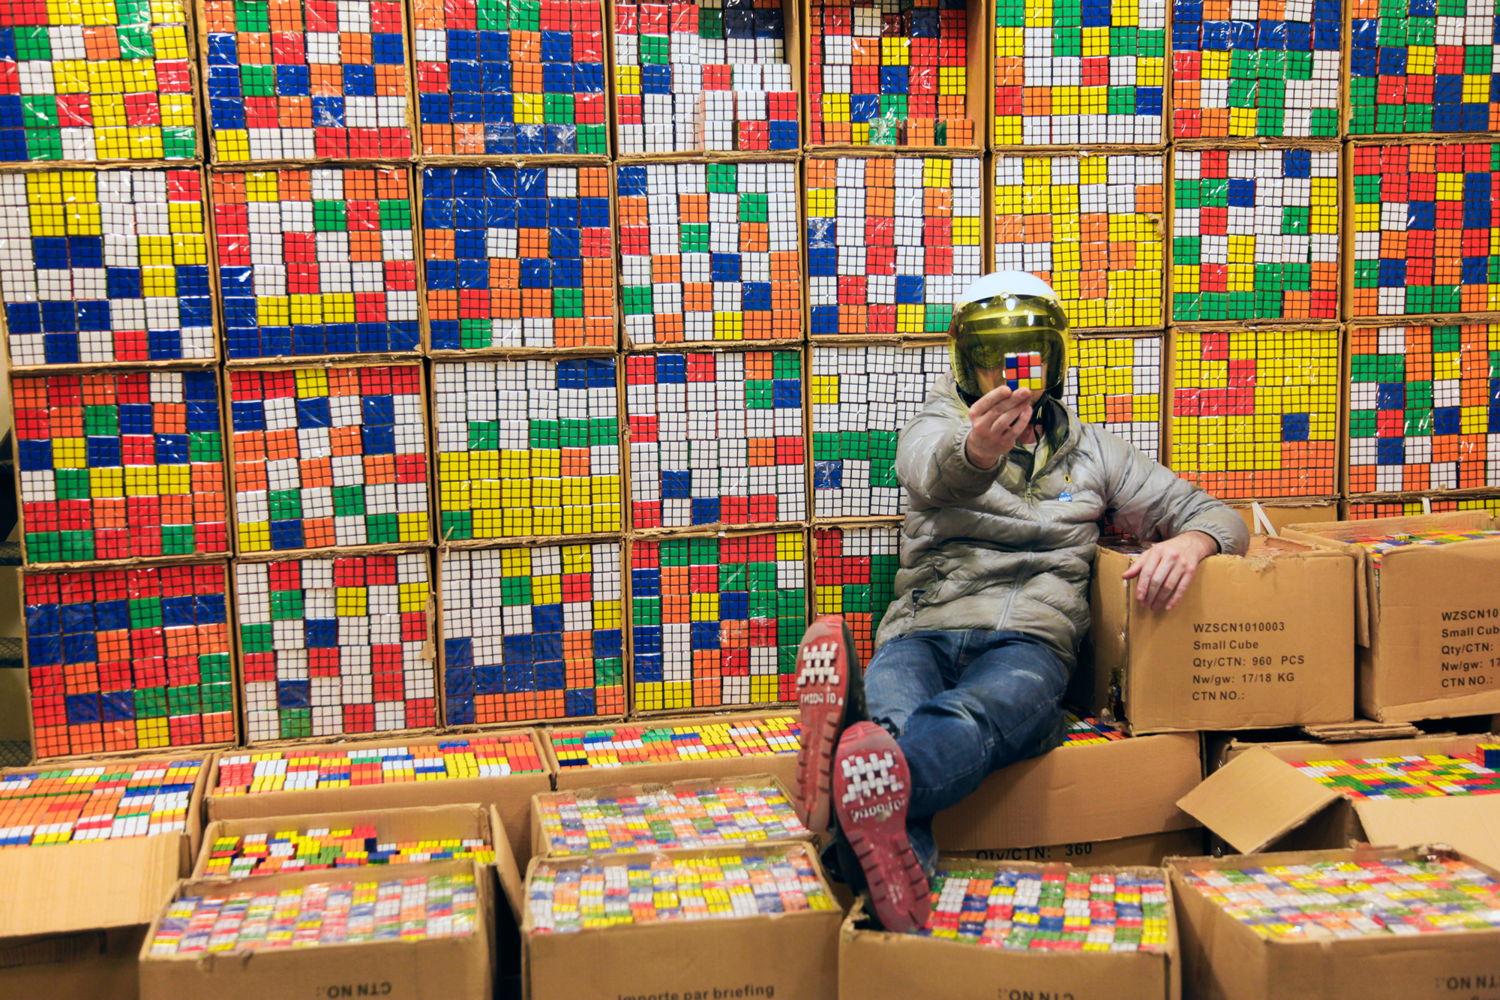 SELF-PORTRAIT WITH CUBES, 2011 © Invader